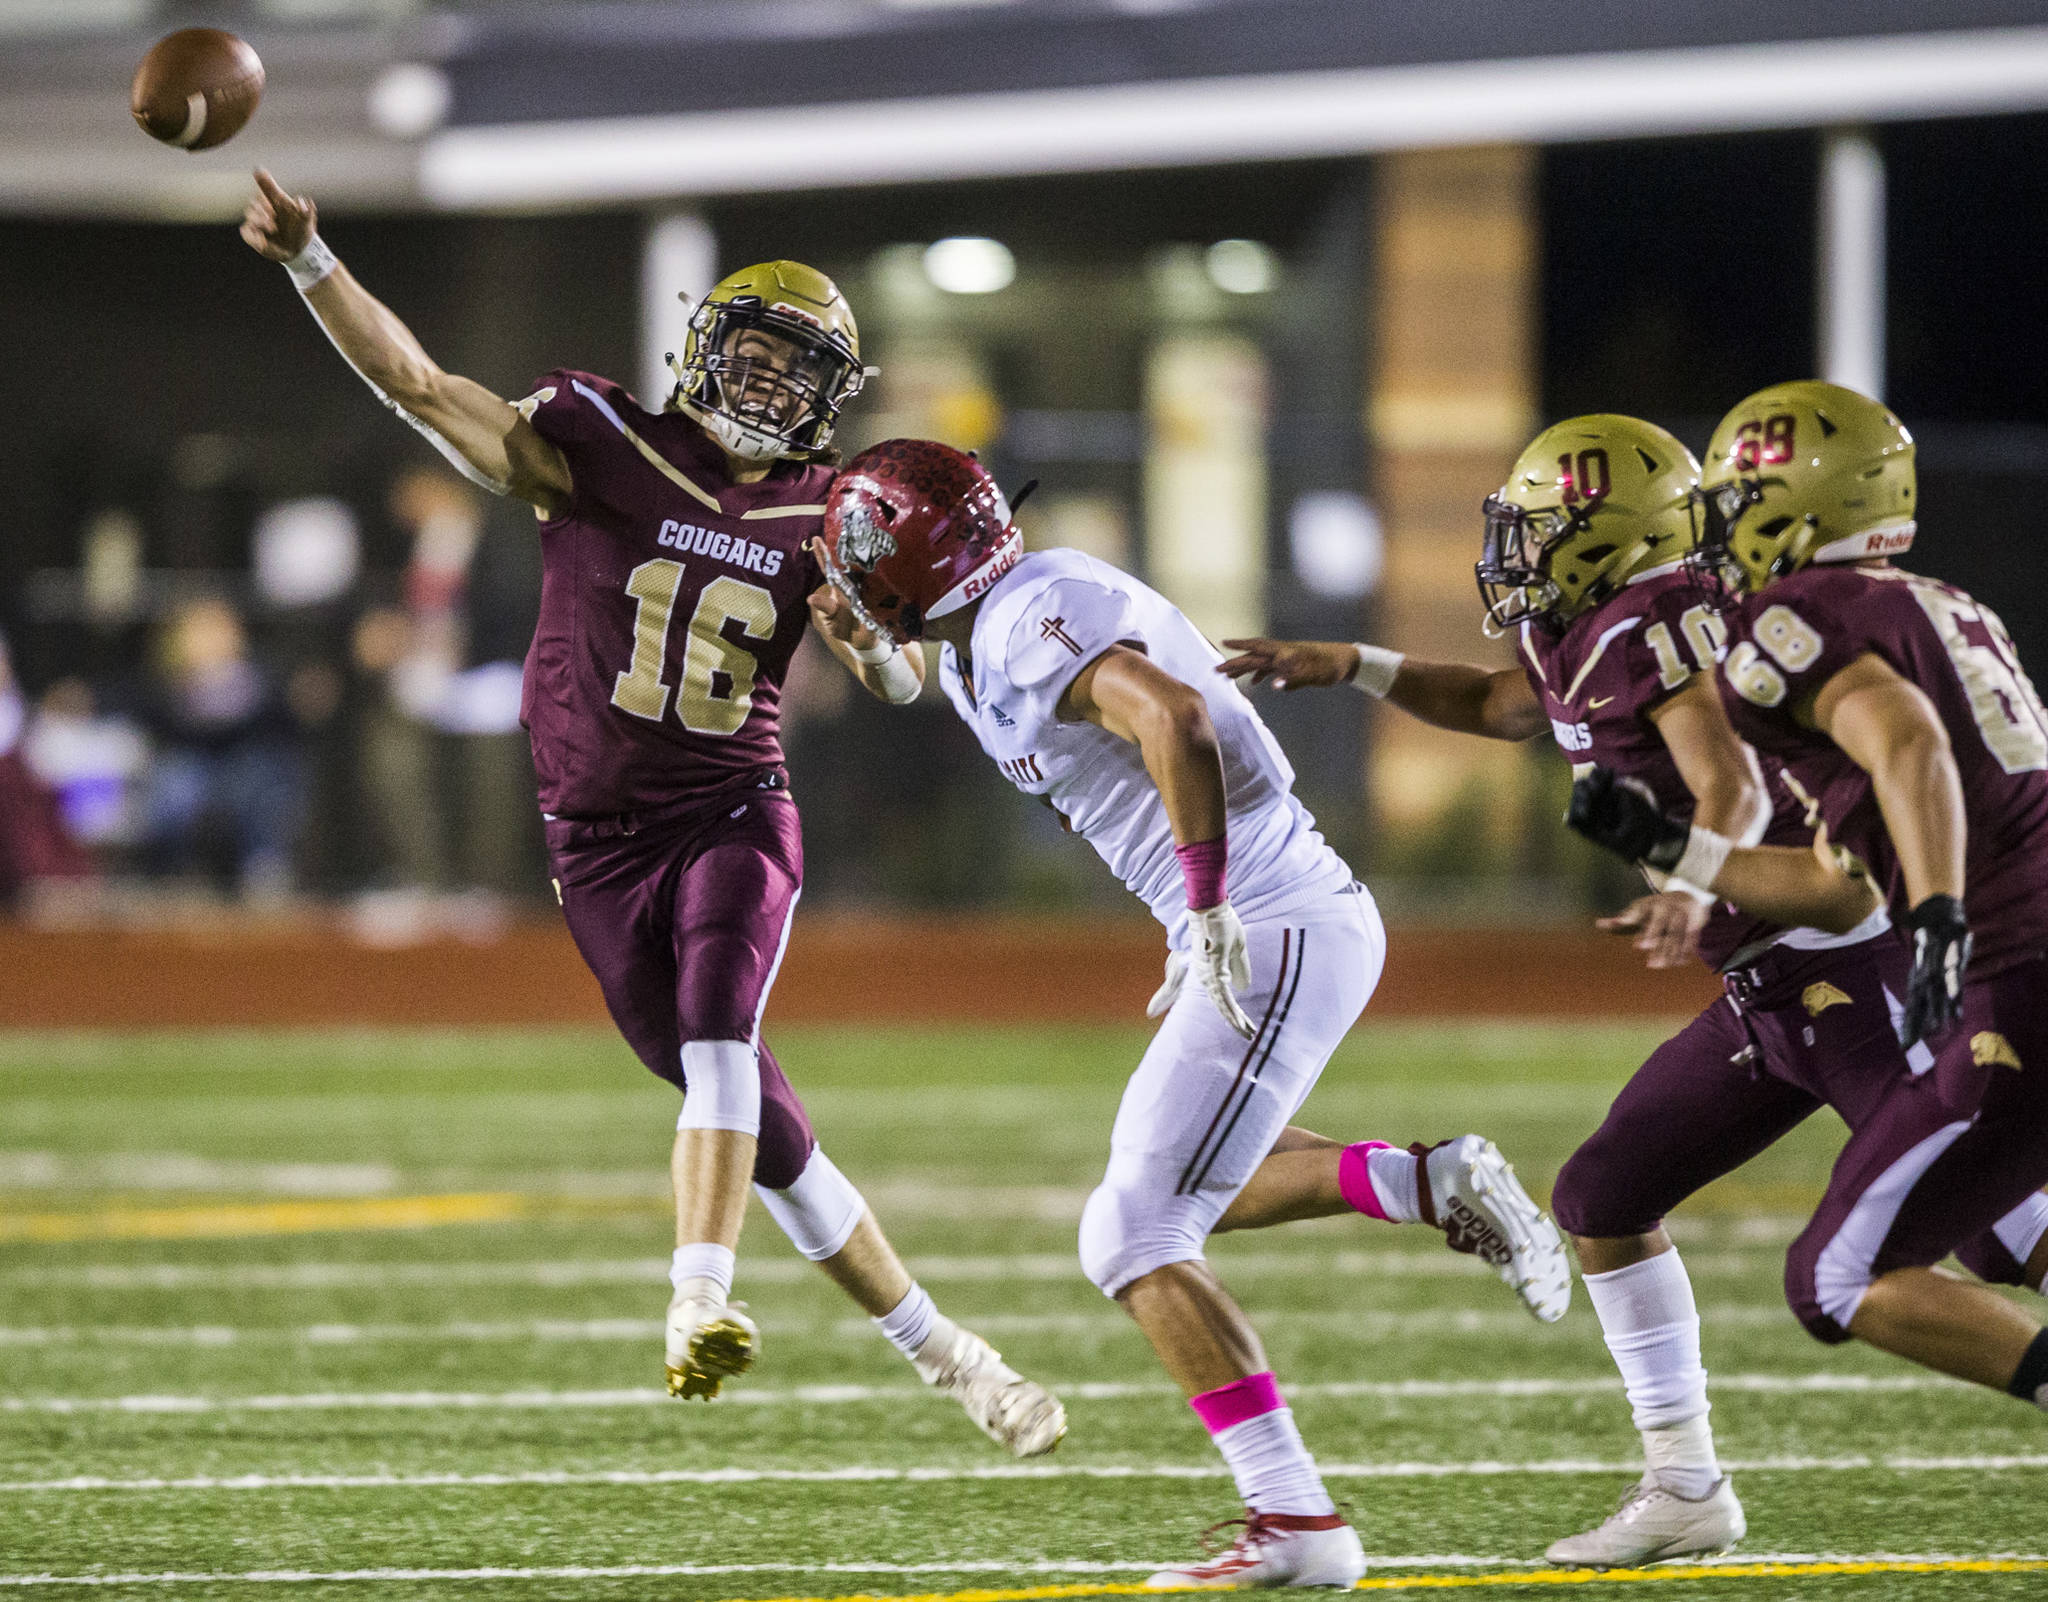 Dual-threat quarterback Jared Taylor led Lakewood to the Class 2A state quarterfinals. (Olivia Vanni / The Herald)